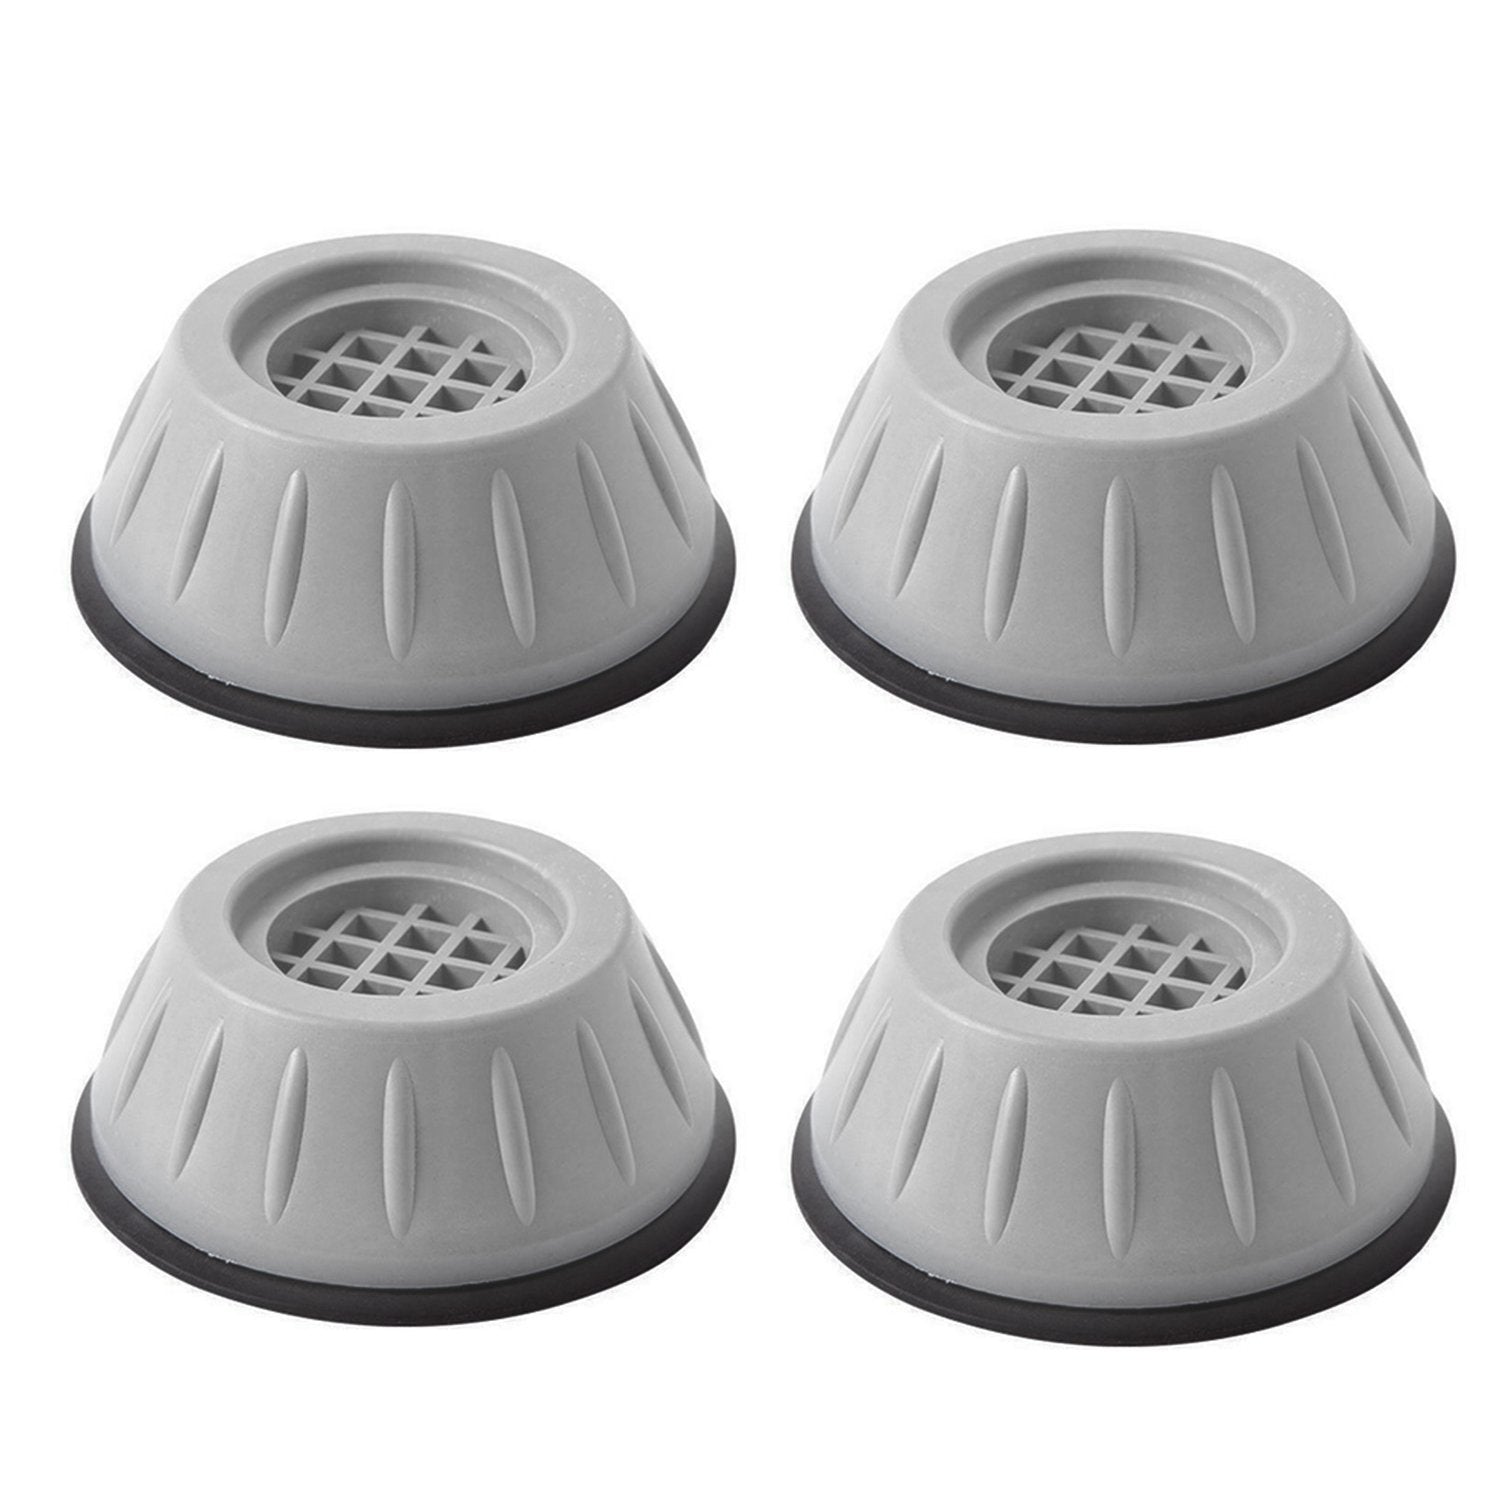 4682 Washer Dryer Anti Vibration Pads with Suction Cup Feet